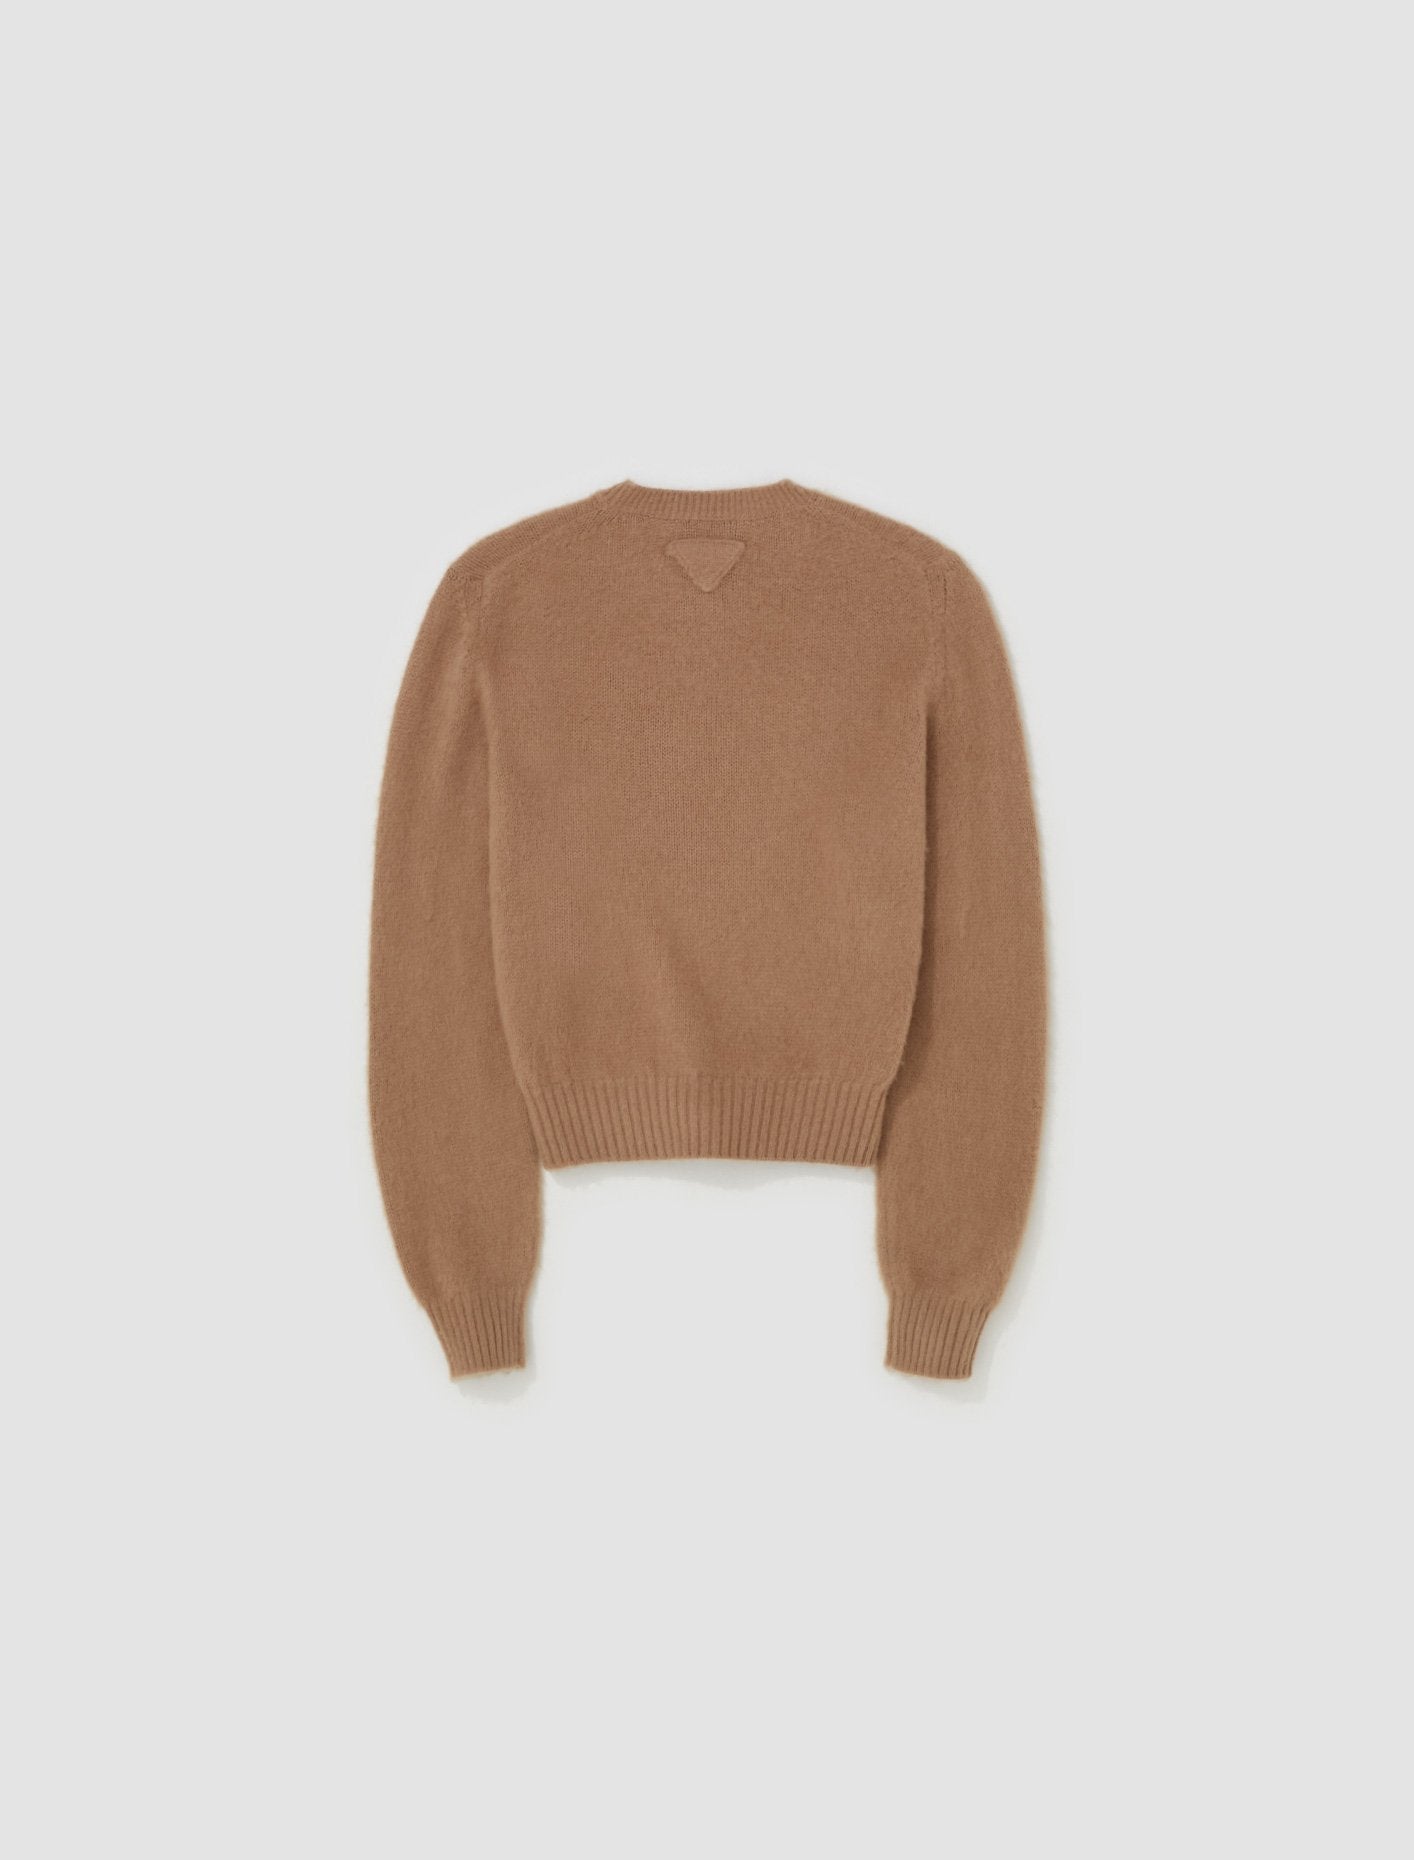 Cashmere Crewneck Sweater in Camel Brown